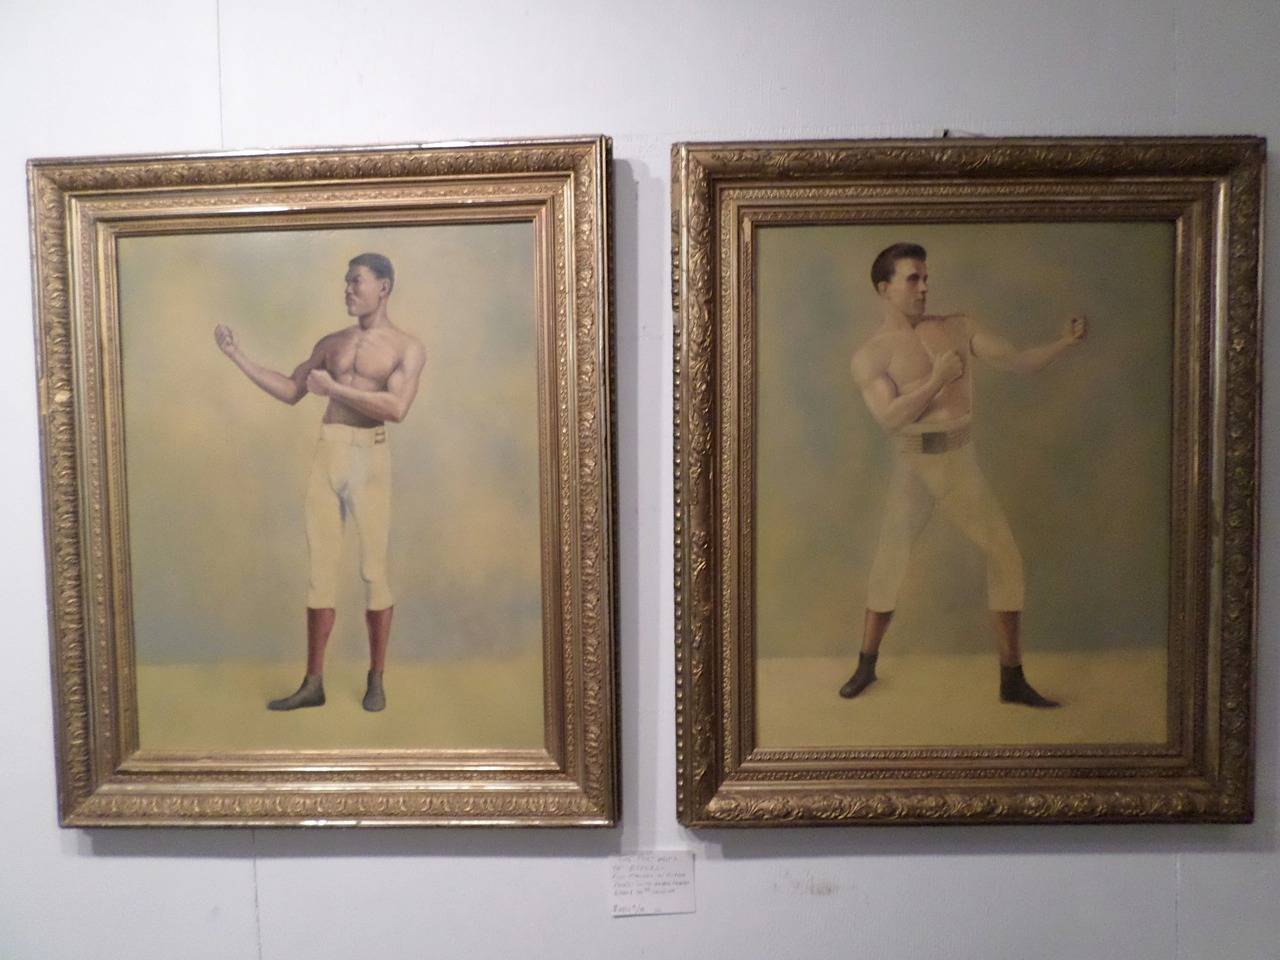 Pair of portraits of boxers, full figures in sparring poses, oil on canvas, both re-lined, early 20th century, possibly in their original gilt frames.
Dimensions: 33